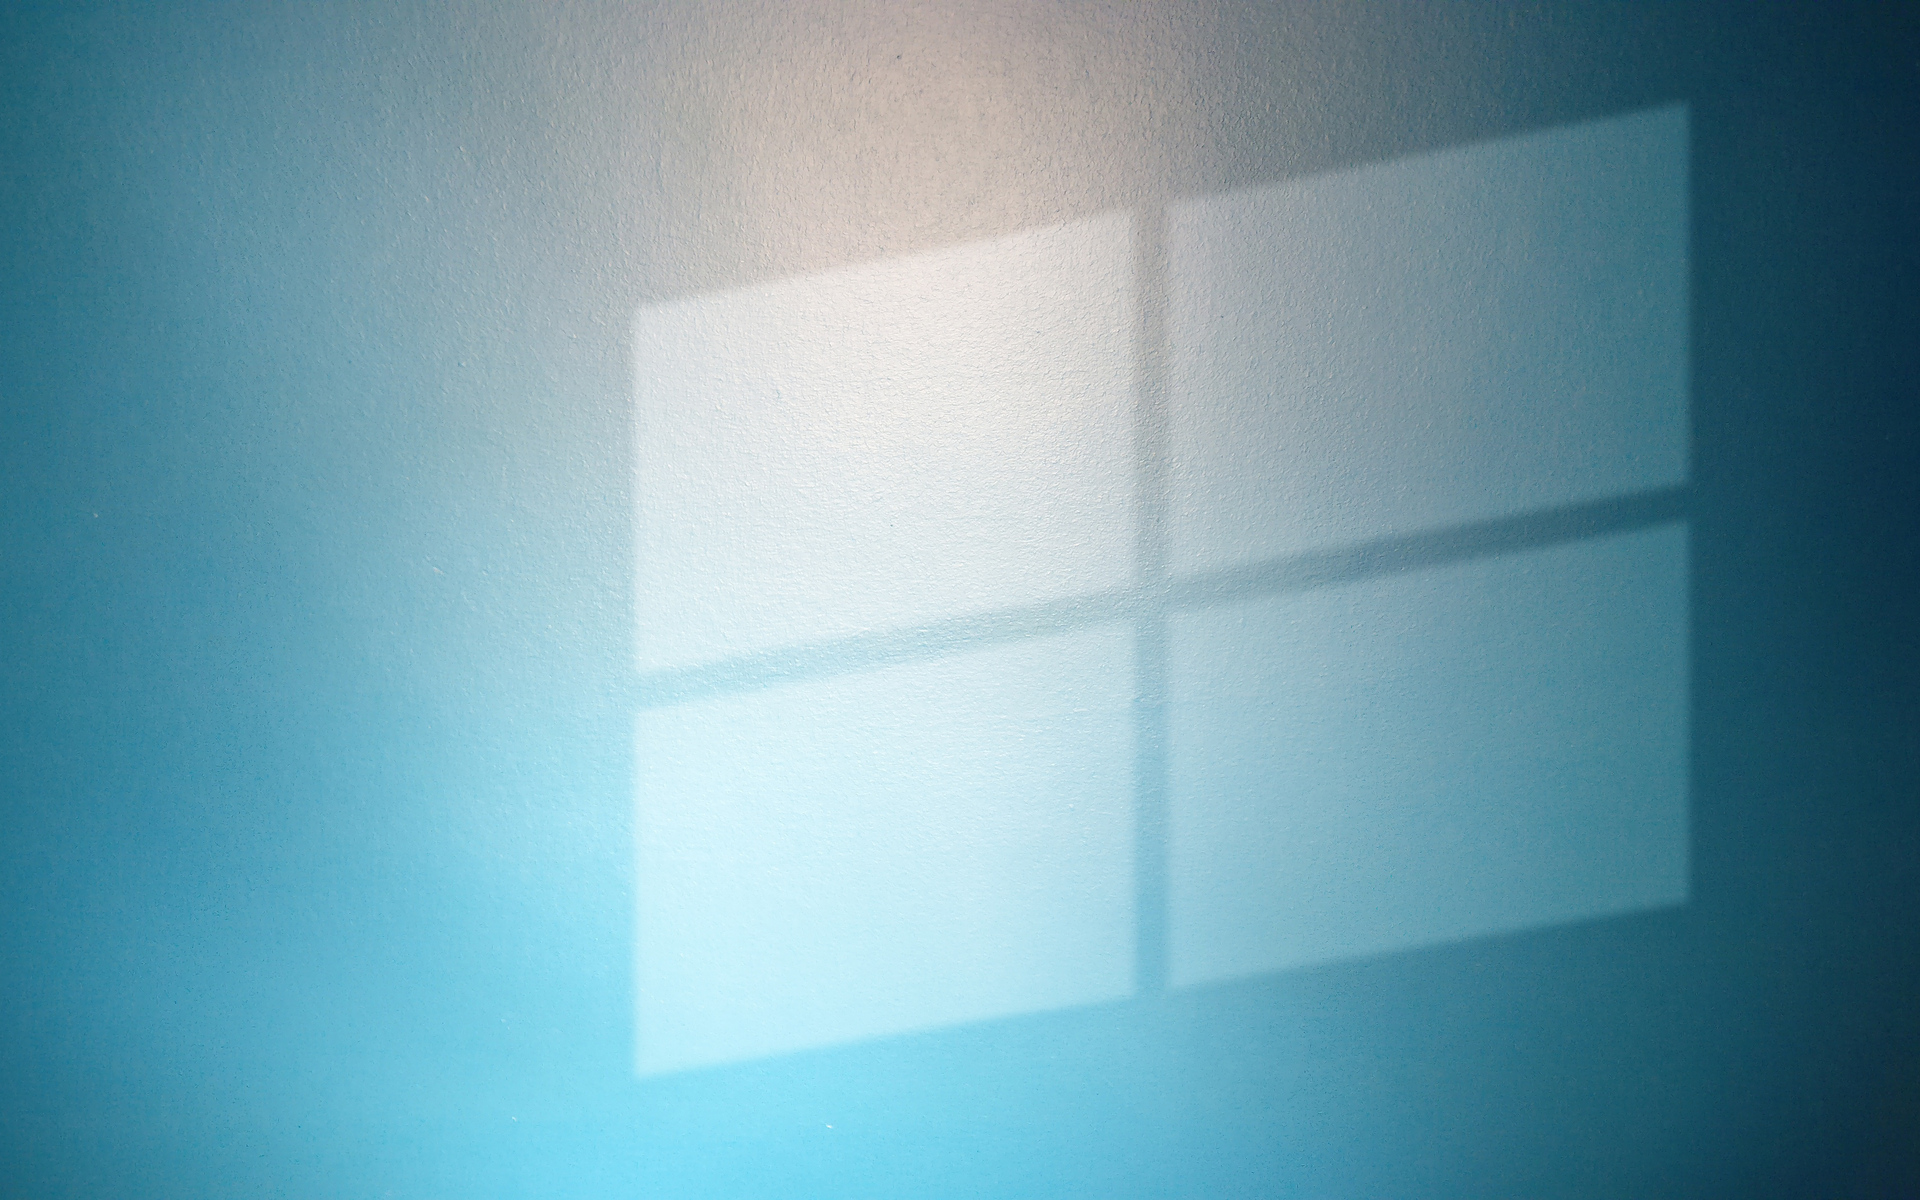 19x10 Windows Logo On Wall 1080p Resolution Hd 4k Wallpapers Images Backgrounds Photos And Pictures